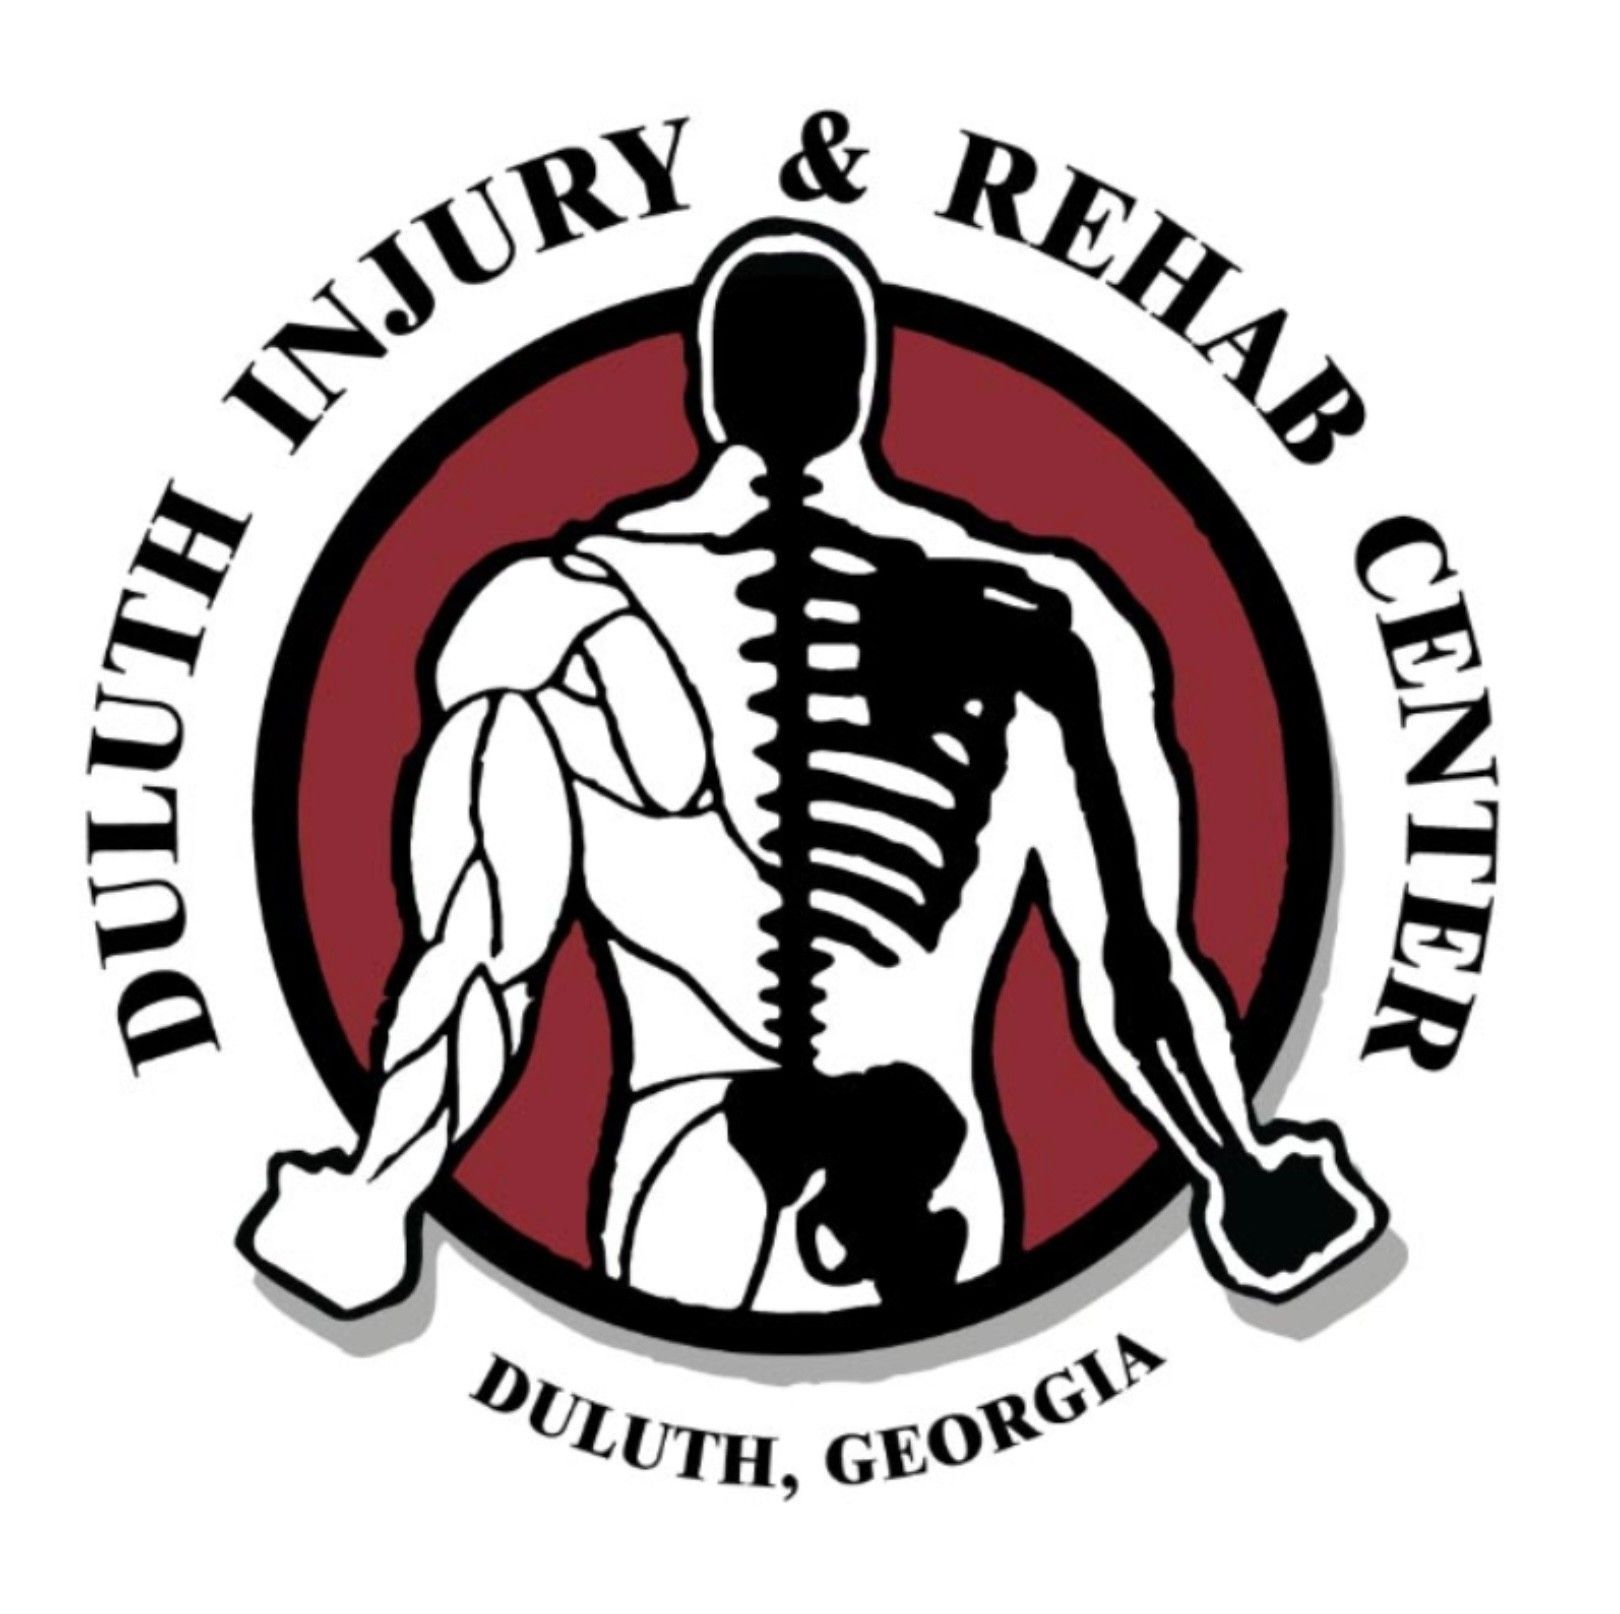 Logo of duluth injury & rehab center featuring a muscular figure with exposed skeletal structure, enclosed within a circular red and black border with the center's name and location.